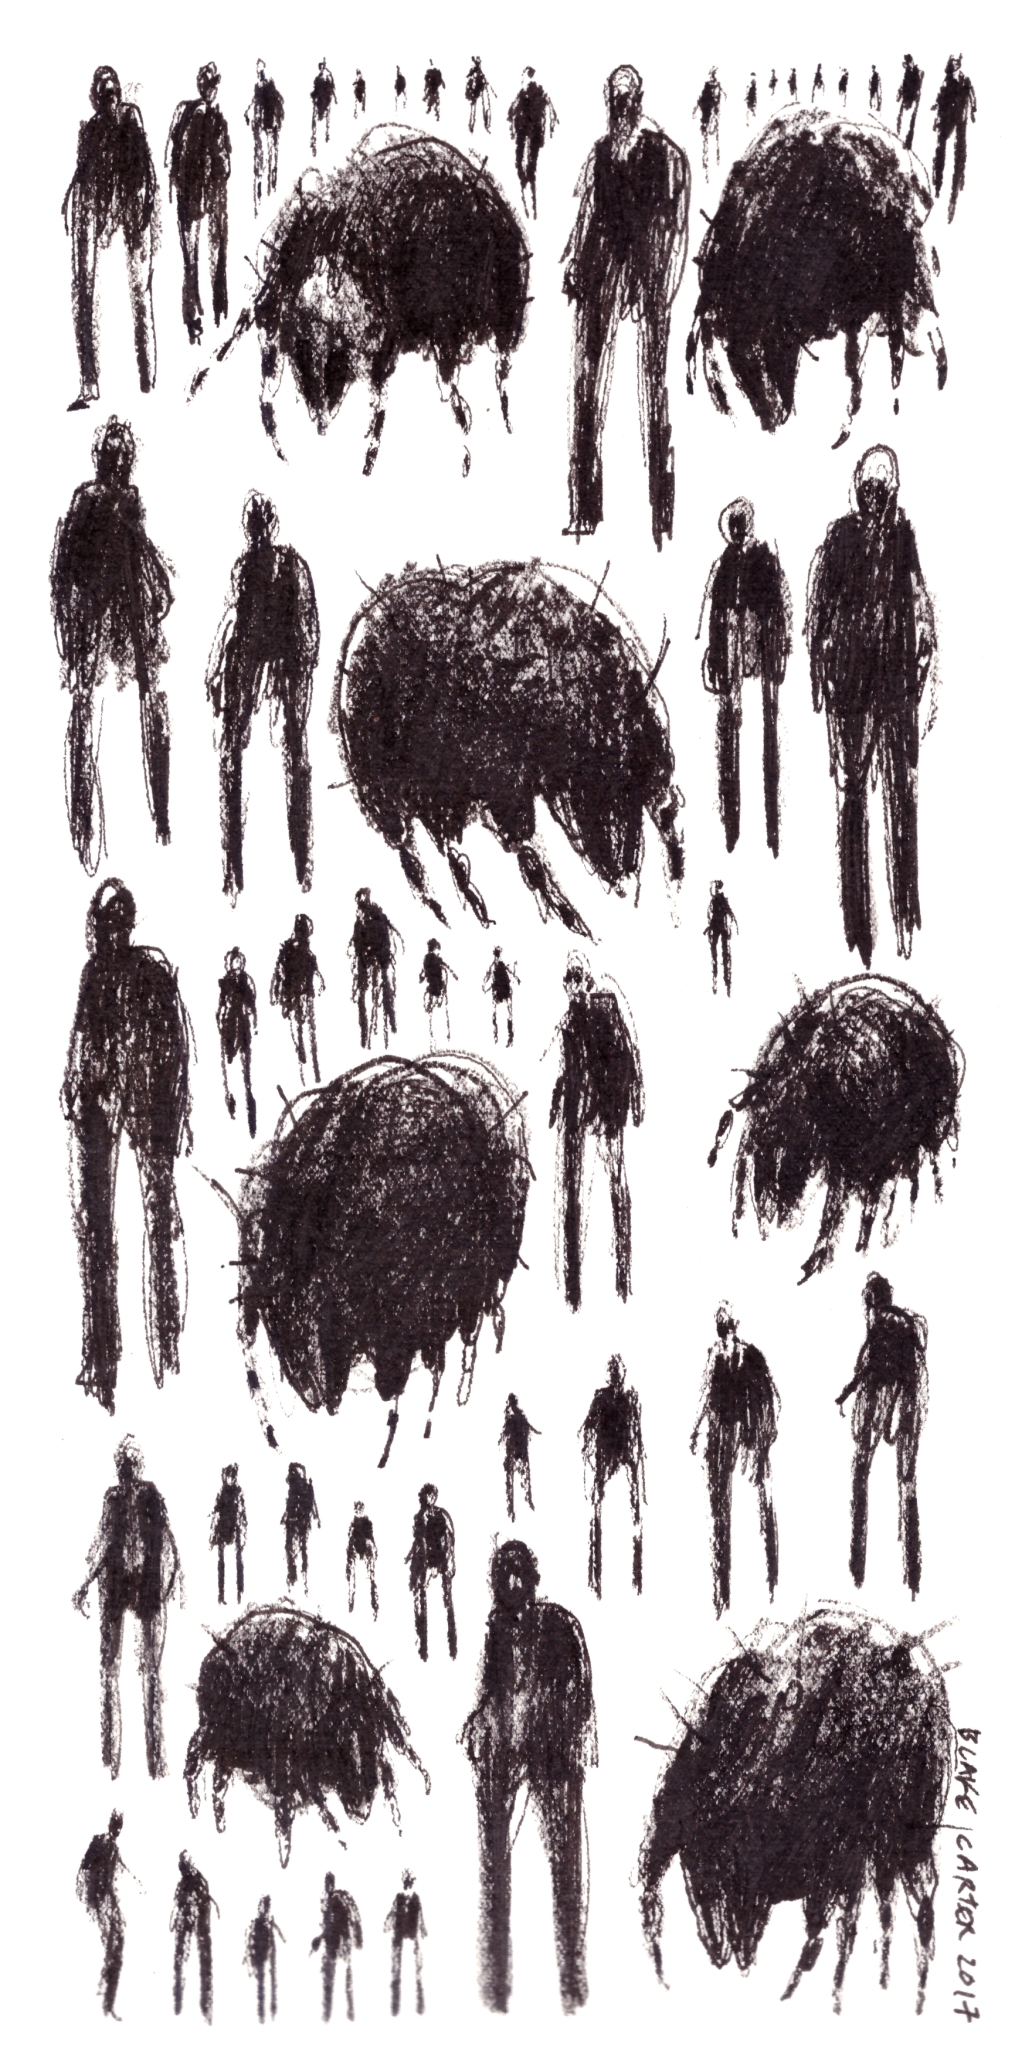 2017 - Of Mites and Men, ink on paper, 6x12 inches